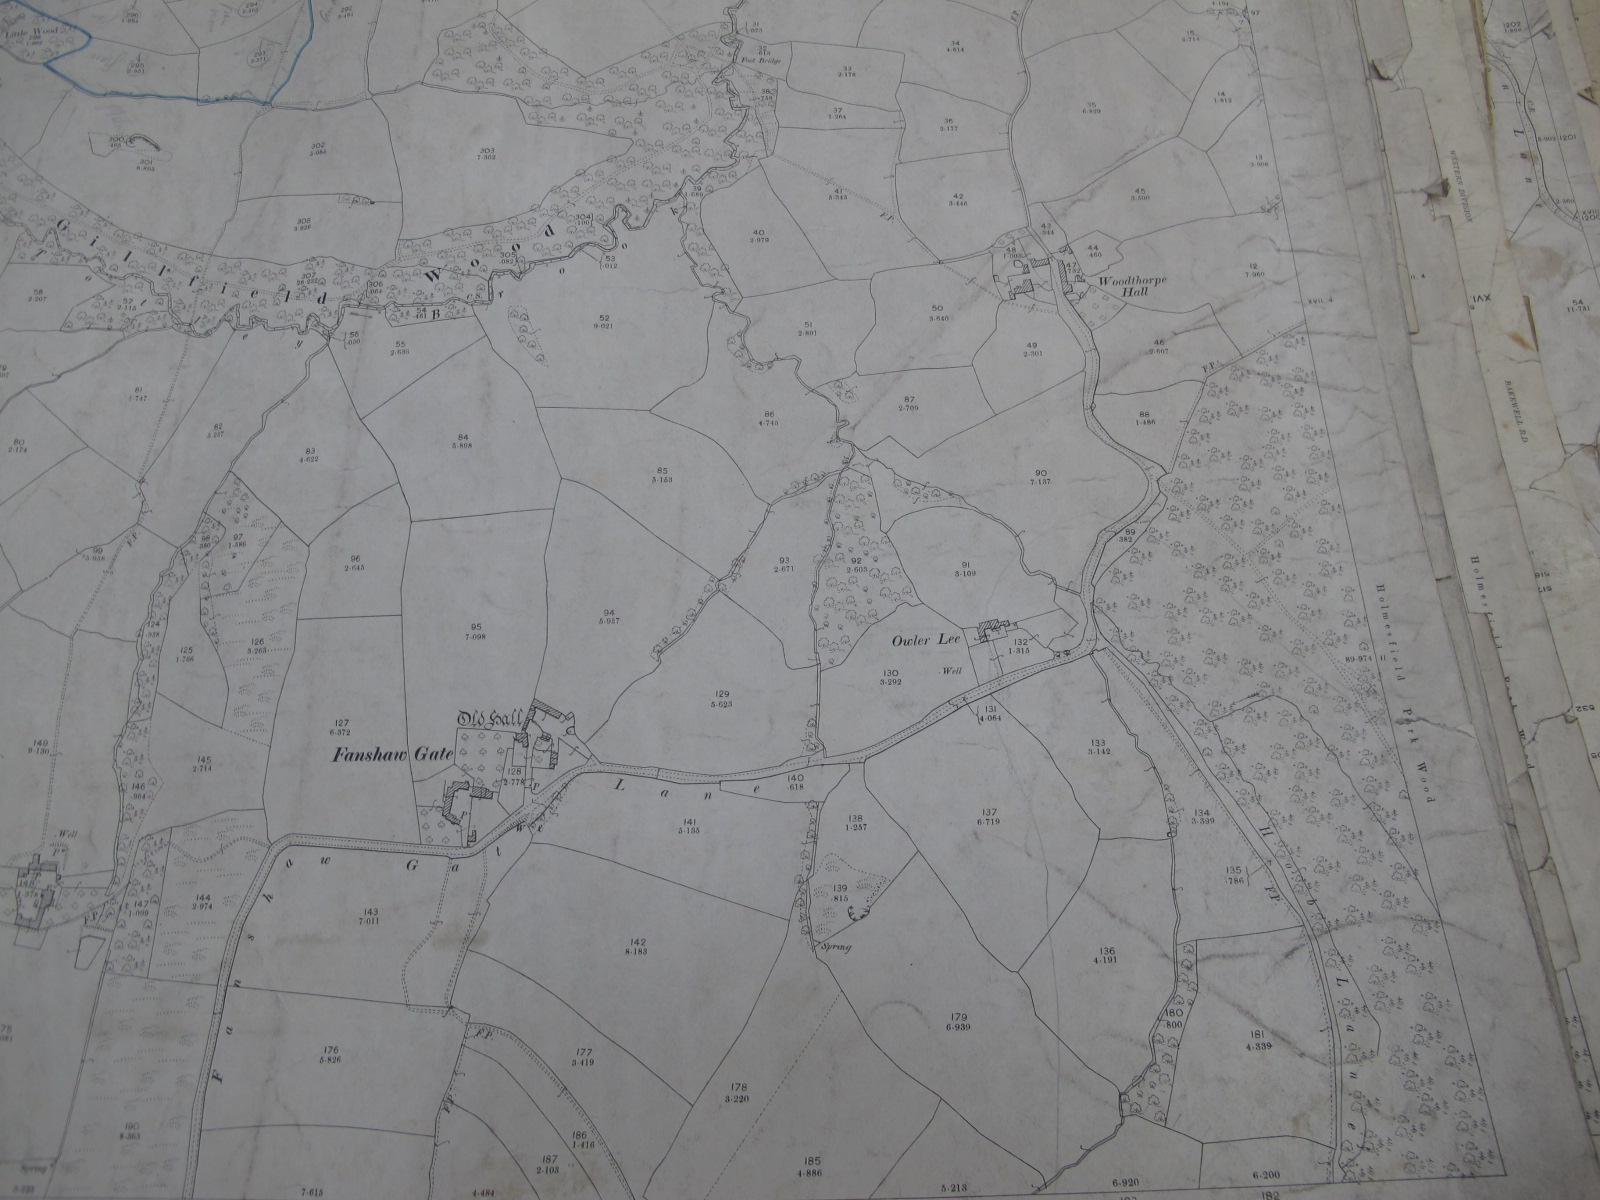 Derbyshire Maps, to include Eckington, Renishaw, Coal Aston, Scarsdale, Dronfield, Dronfield - Image 7 of 11